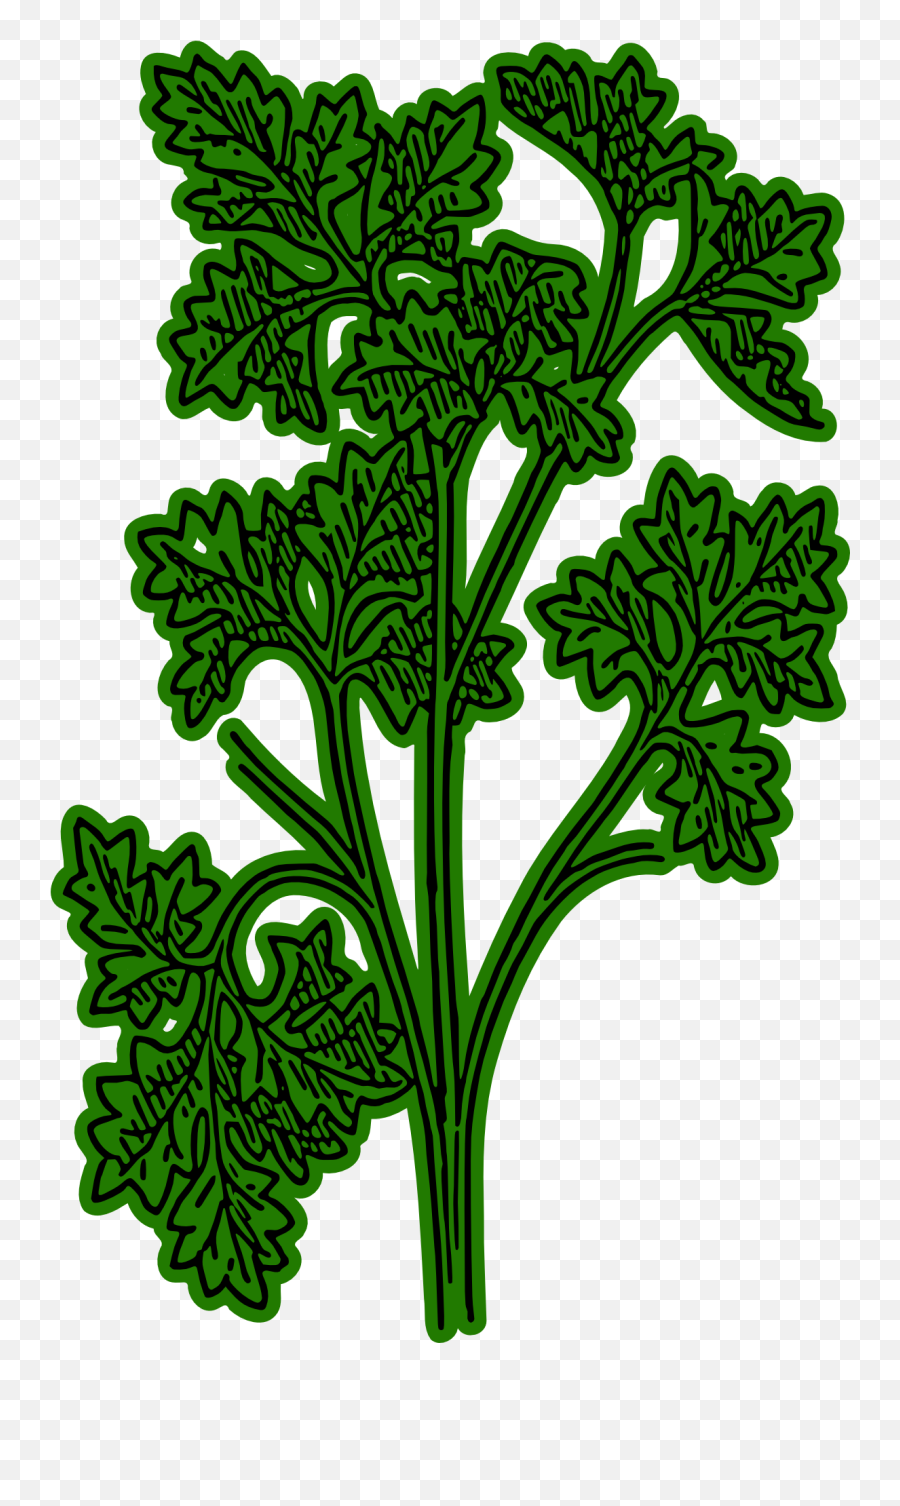 Parsley As A Graphic Illustration - Parsley Clipart Transparent Png,Parsley Png